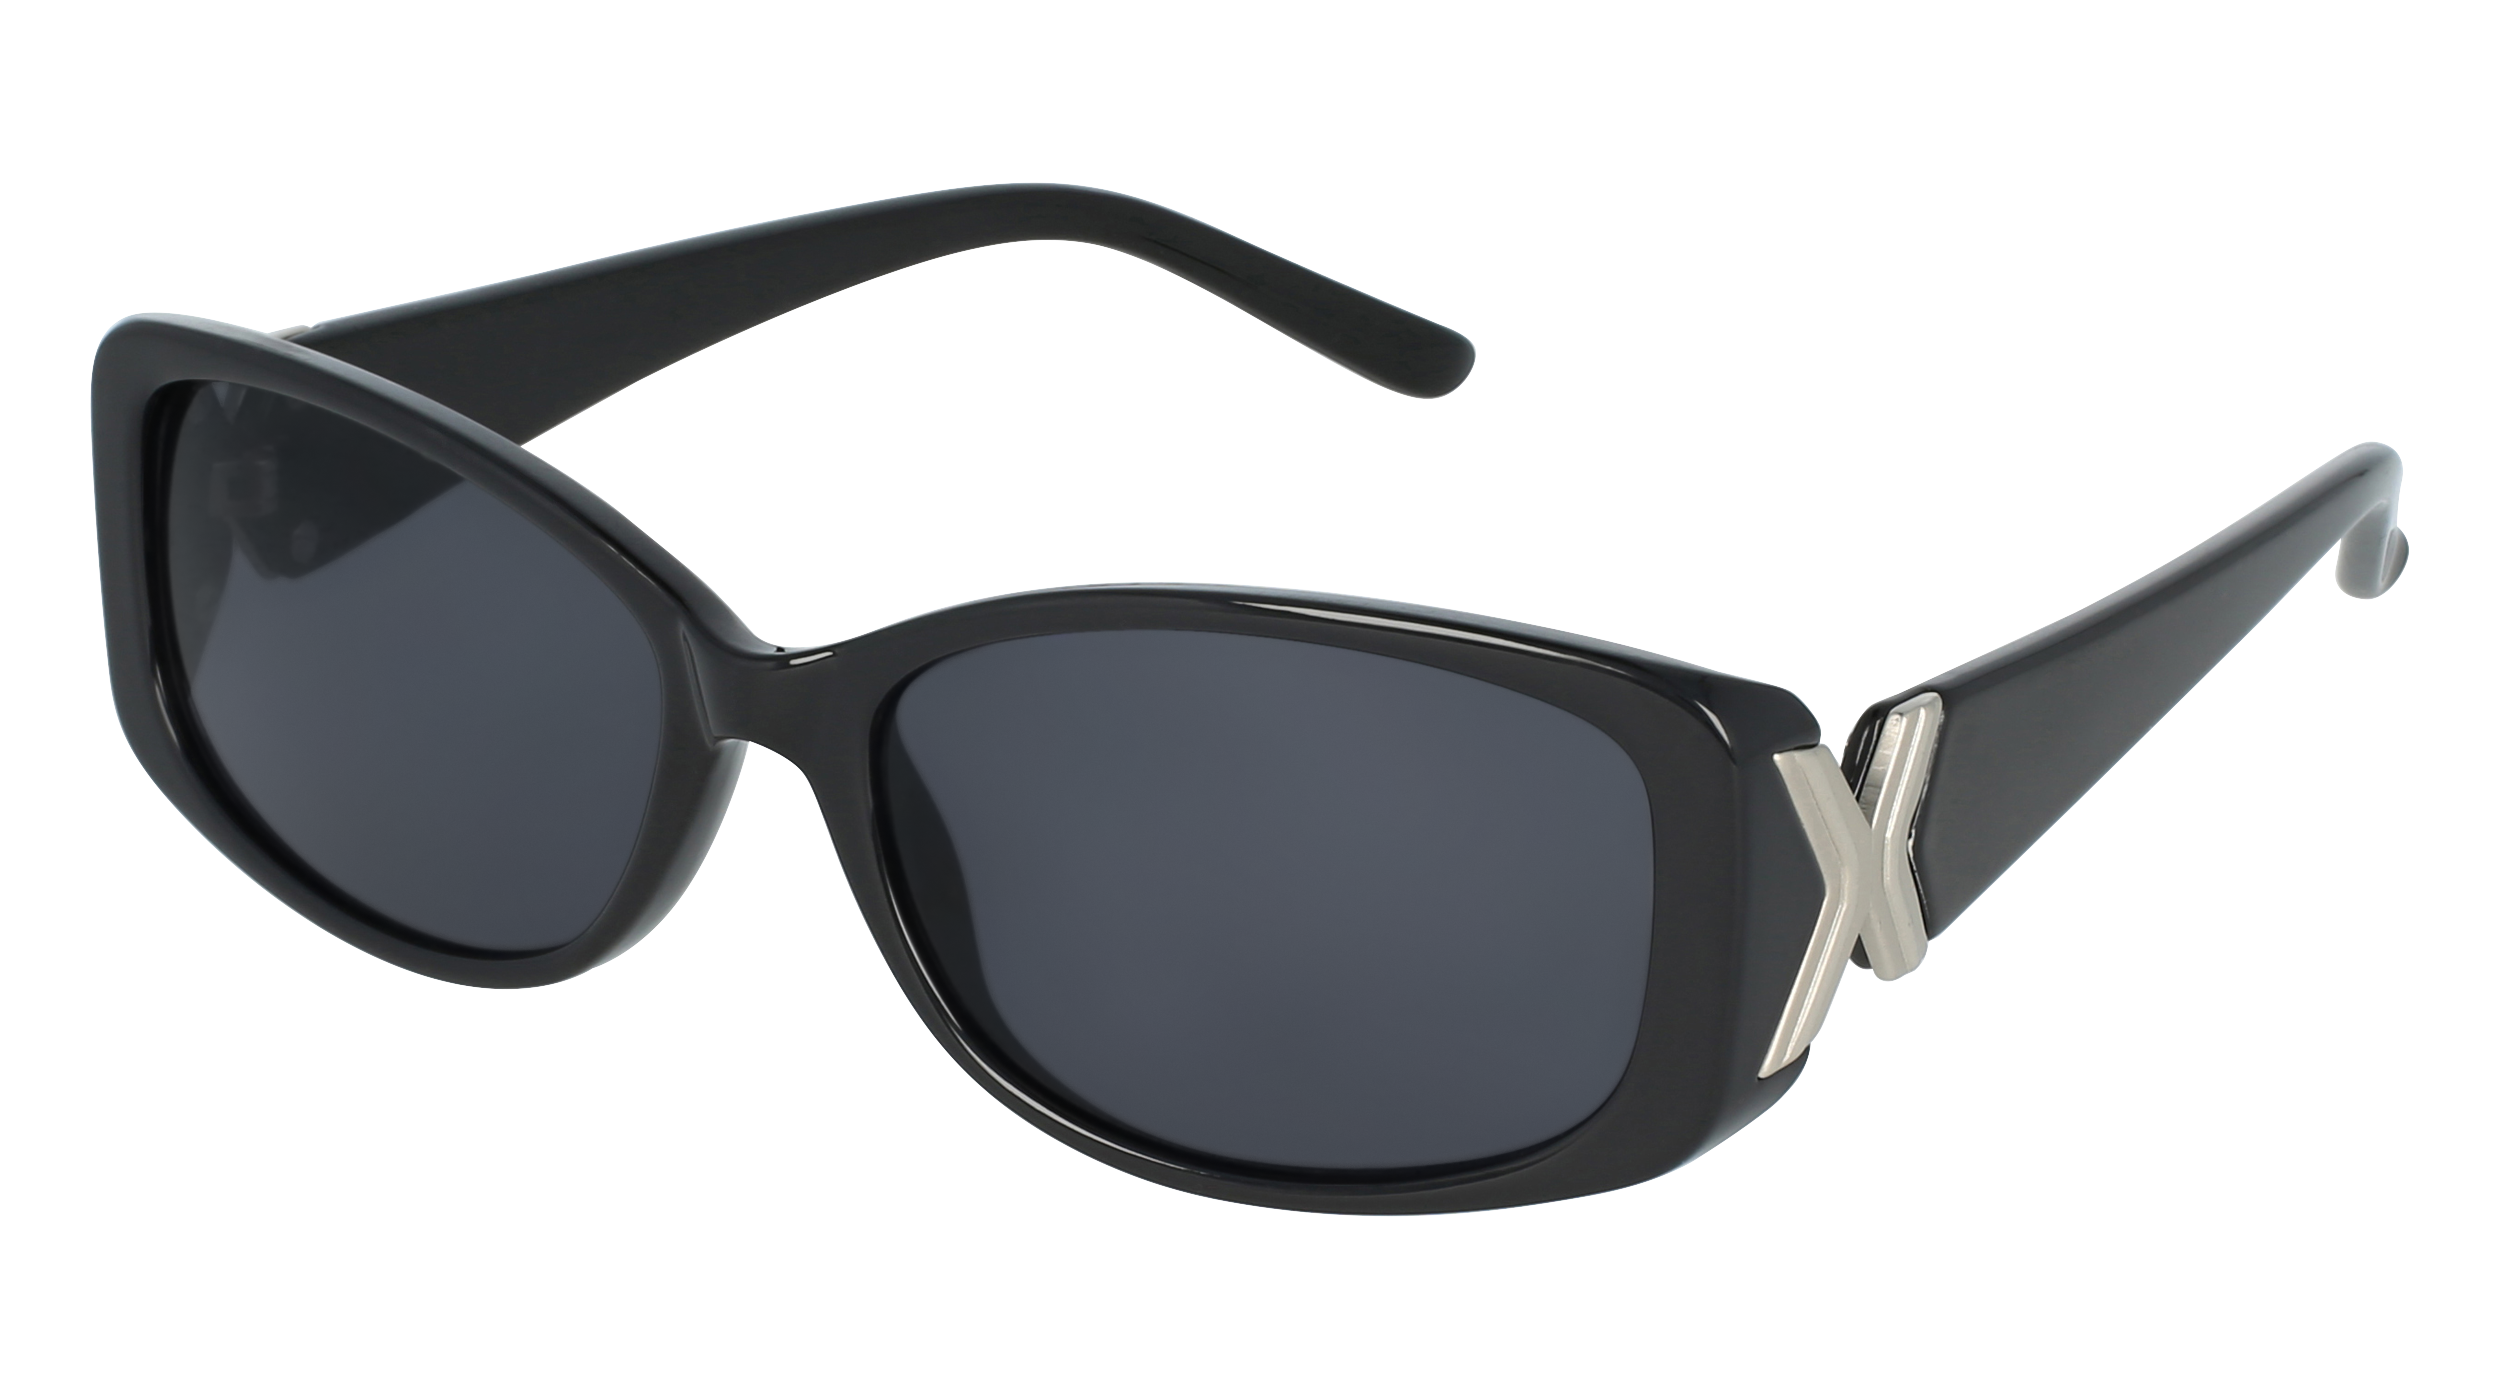 a S 716 women's sunglasses (from the side)